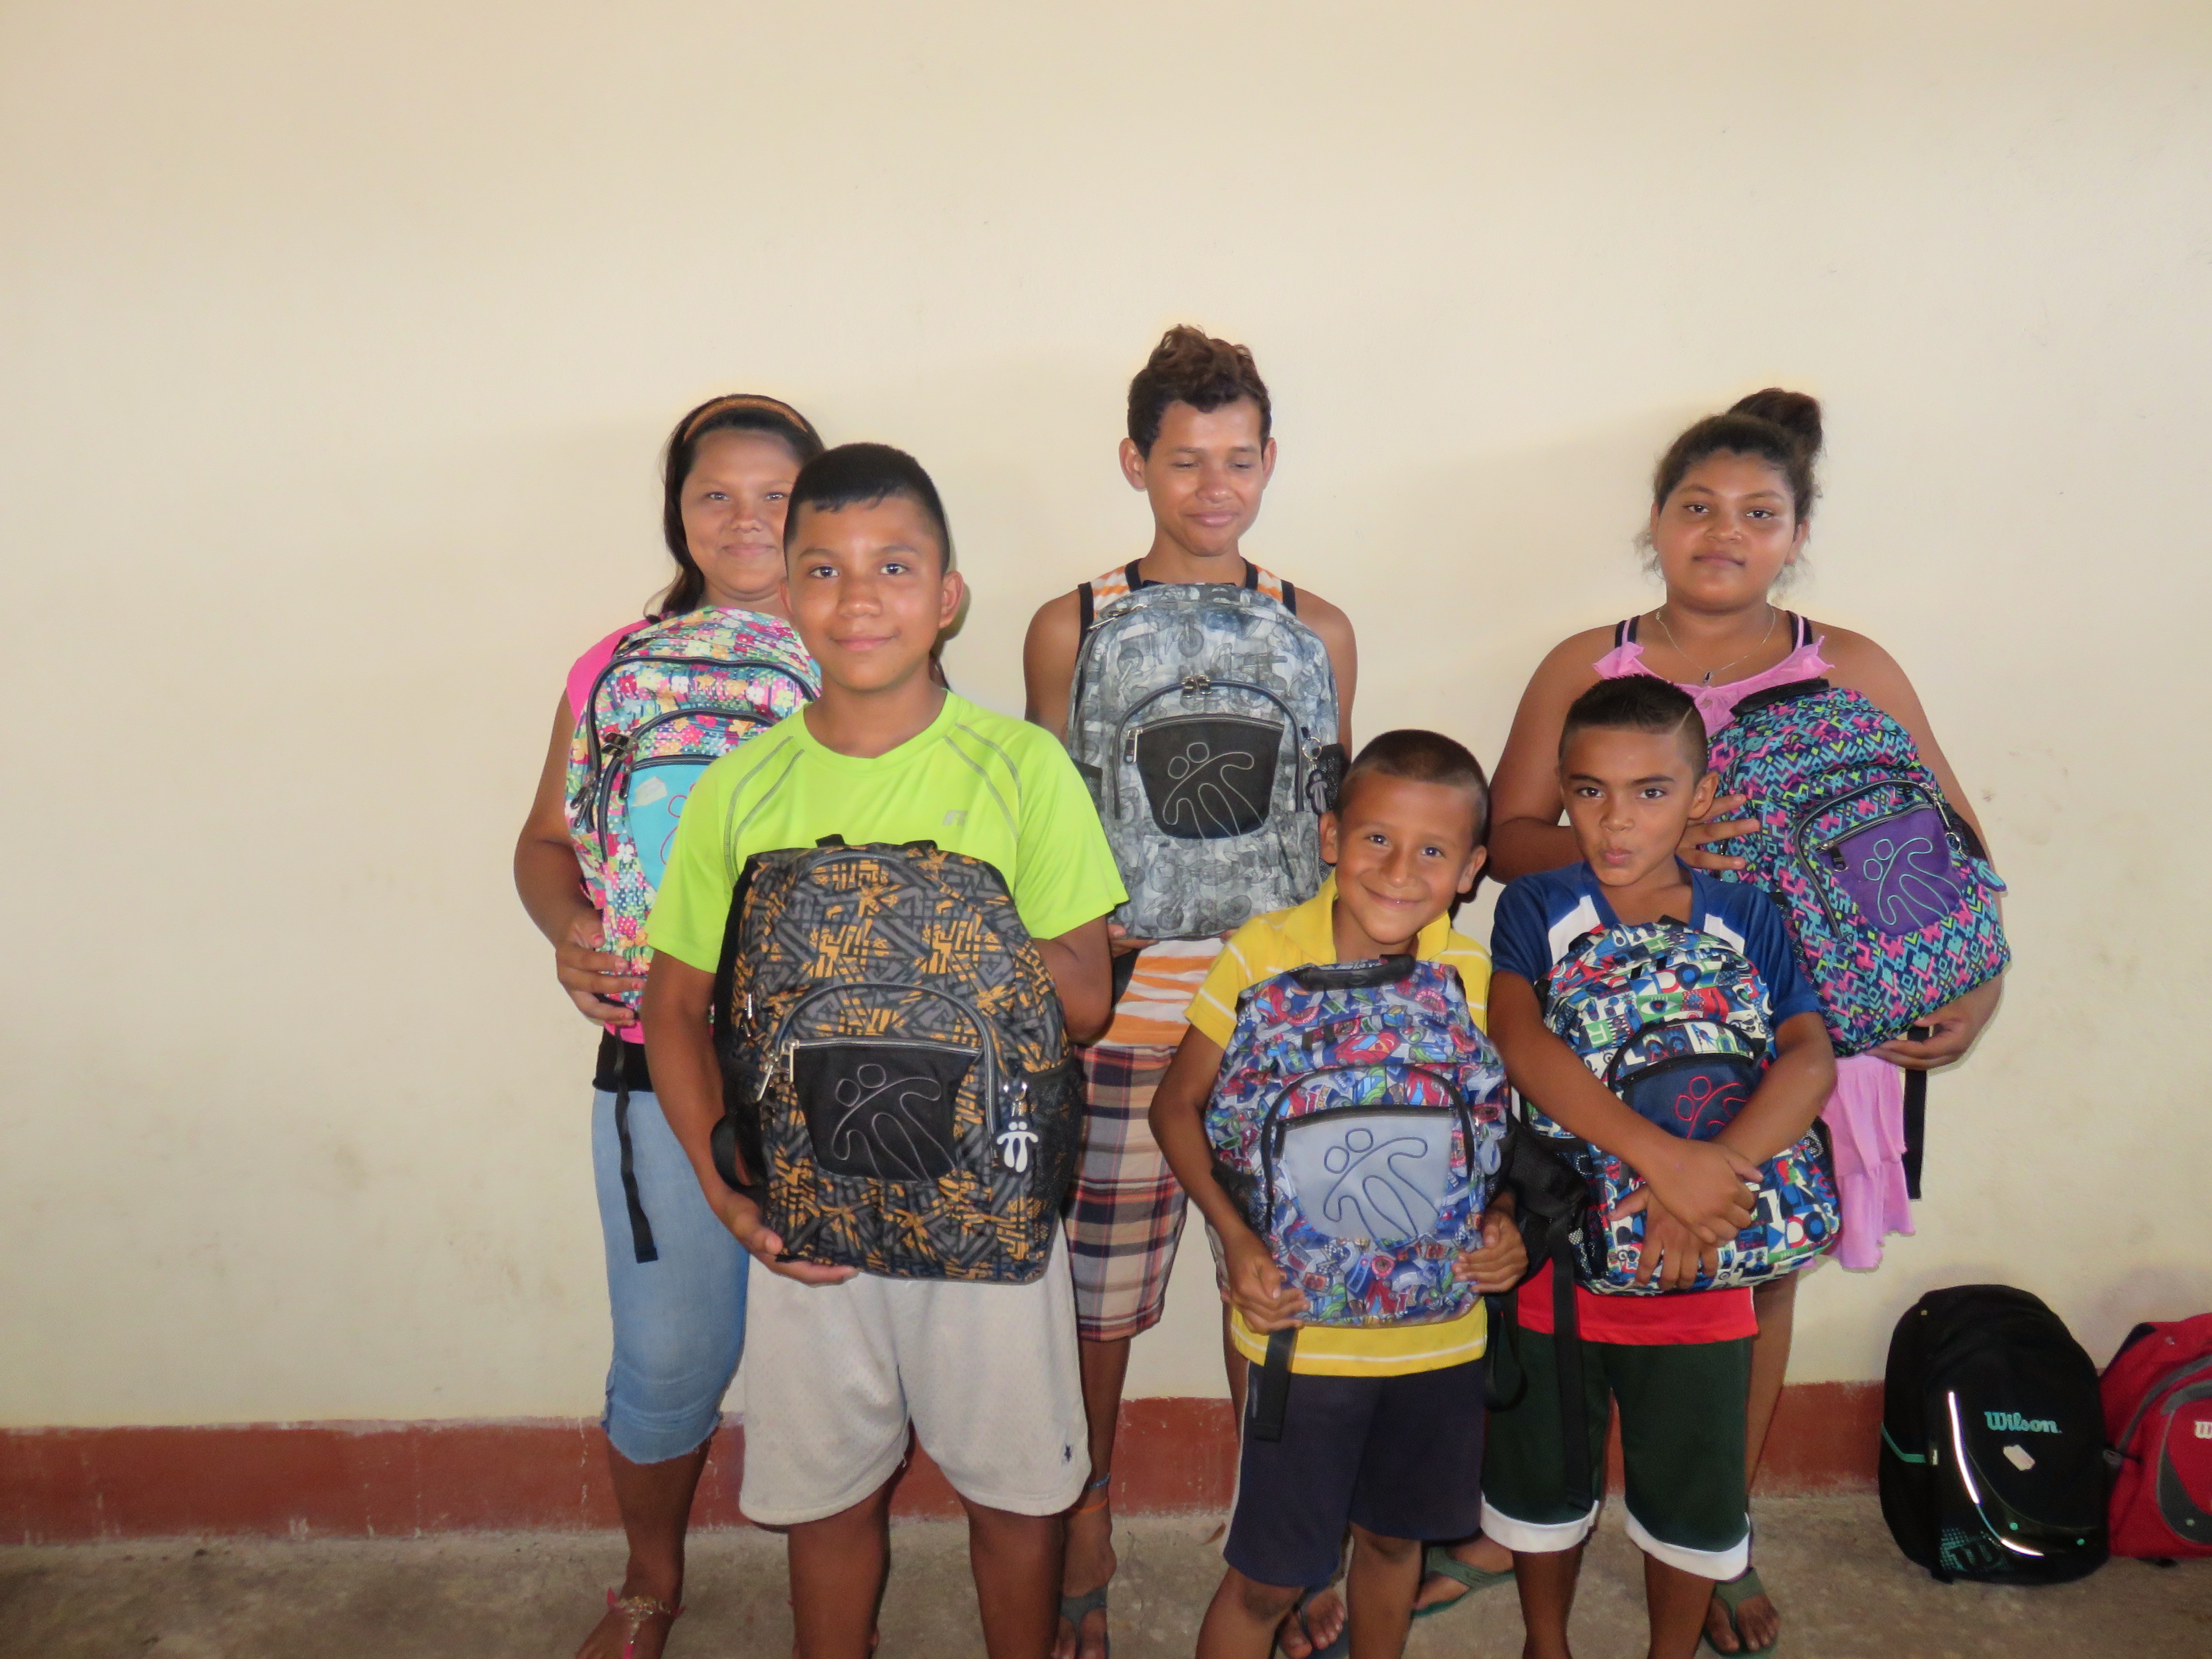 All of these incredible students were honored as our top students or most-improved students from Santa Matilde. 